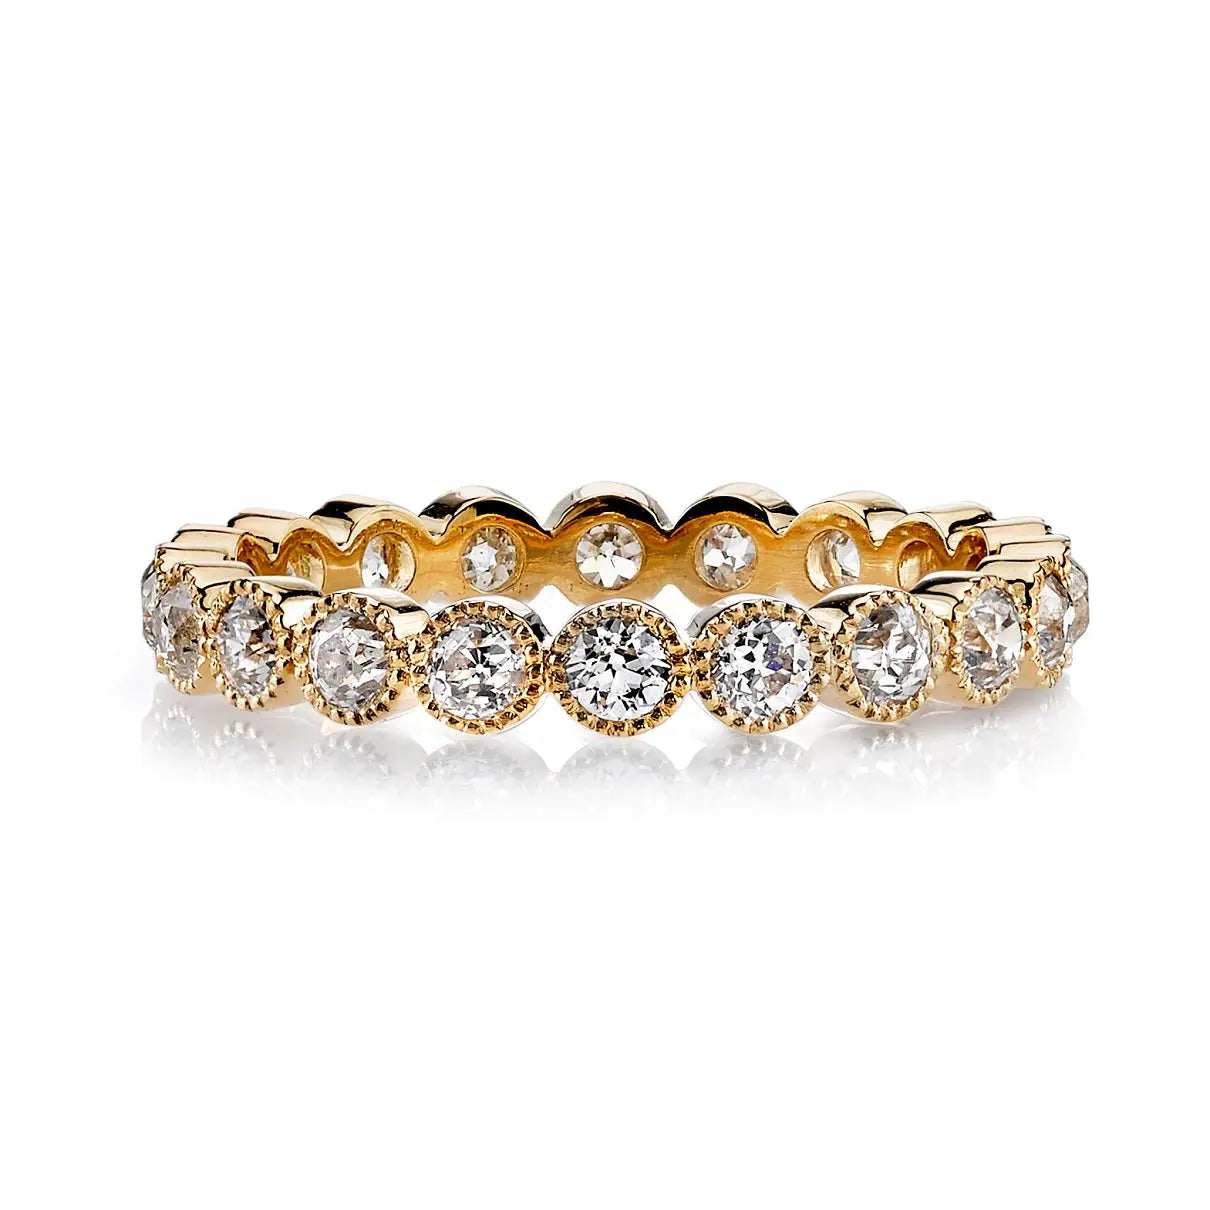 18k Yellow Gold with Approximately 1.00ctw G-H/VS old European cut diamonds bezel set in a handcrafted eternity band.   Ring Size: 6.5  If you need a different size, please email shop@sbvail.com. If an item is out of stock, please allow 6-8 weeks for delivery.  Designed by Single Stone and made in LA